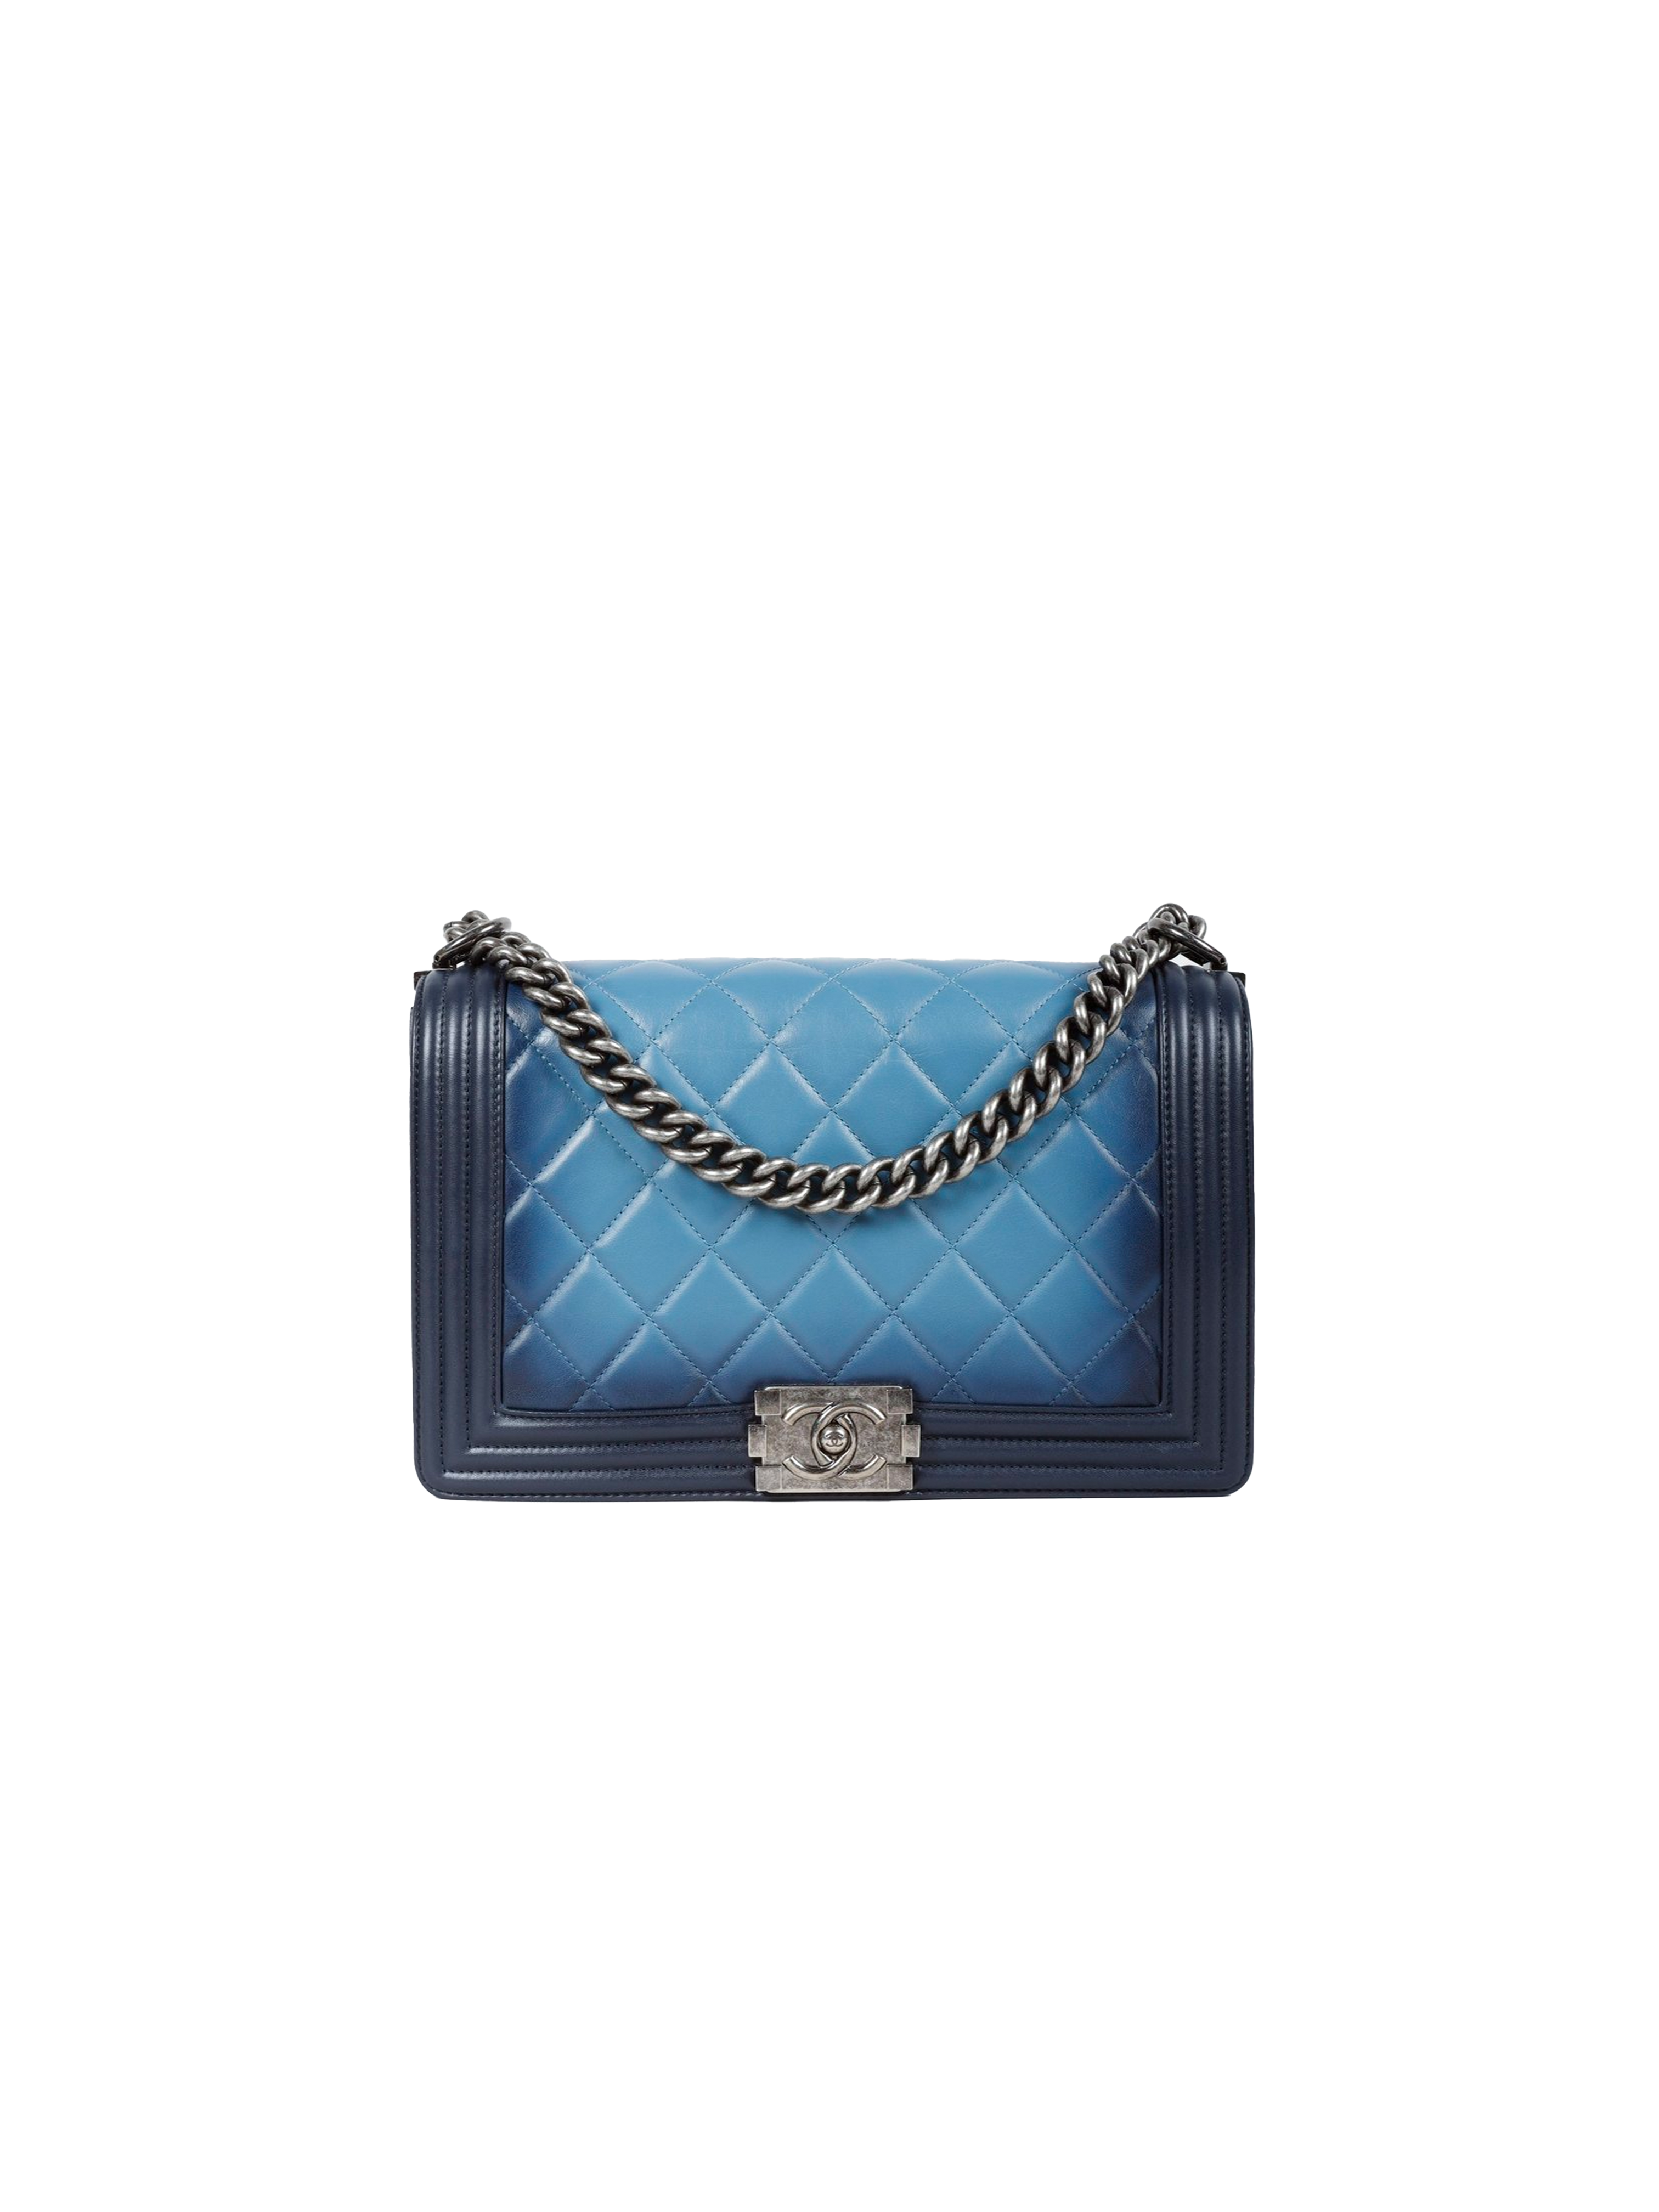 Chanel Mini Classic Flap Bags For Spring Summer 2014